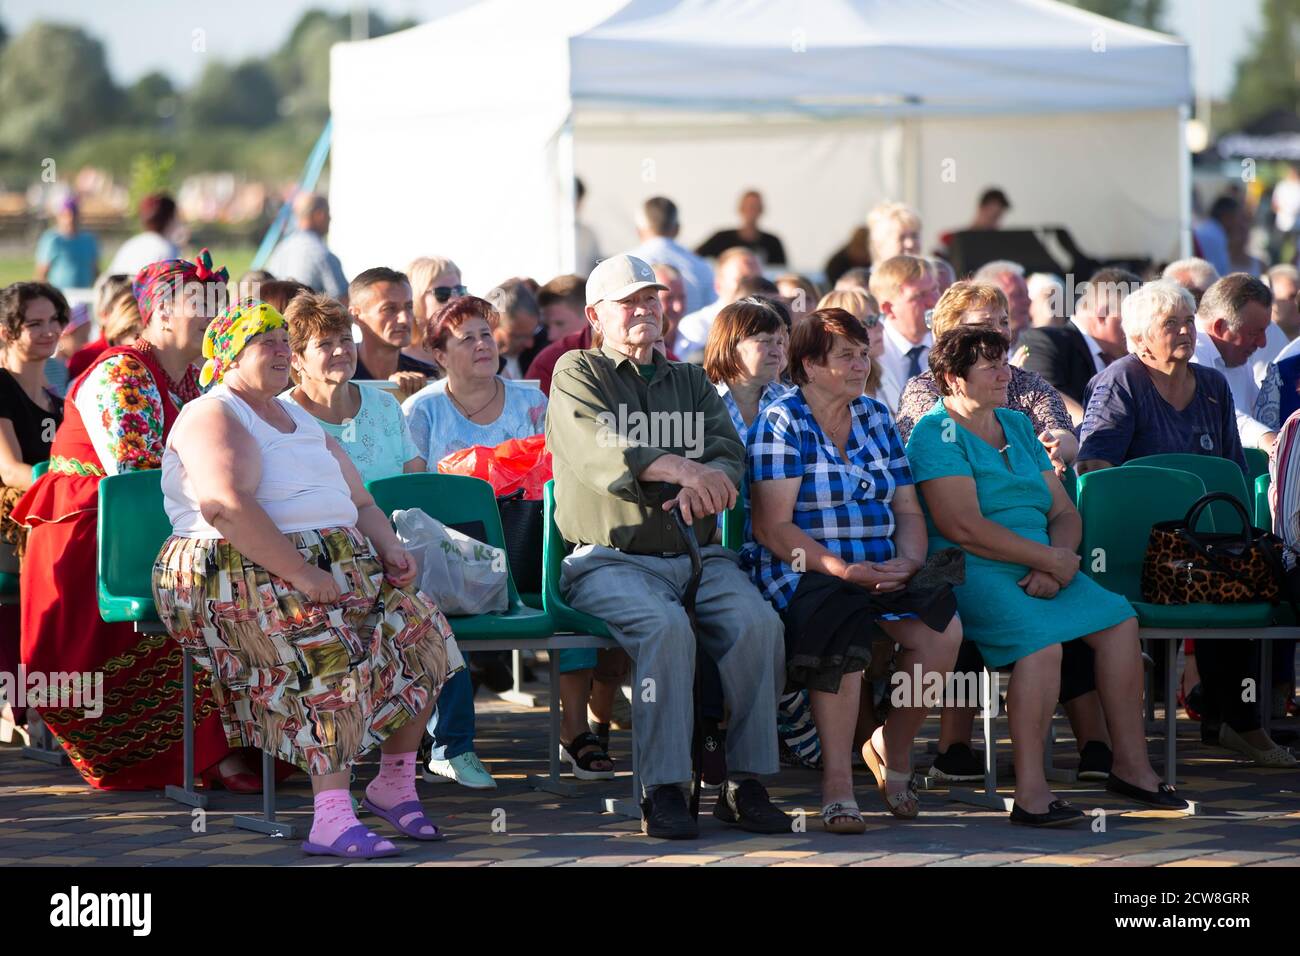 08 29 2020 Belarus, Lyaskovichi. Celebration in the city. Russian village people at a summer concert. Stock Photo